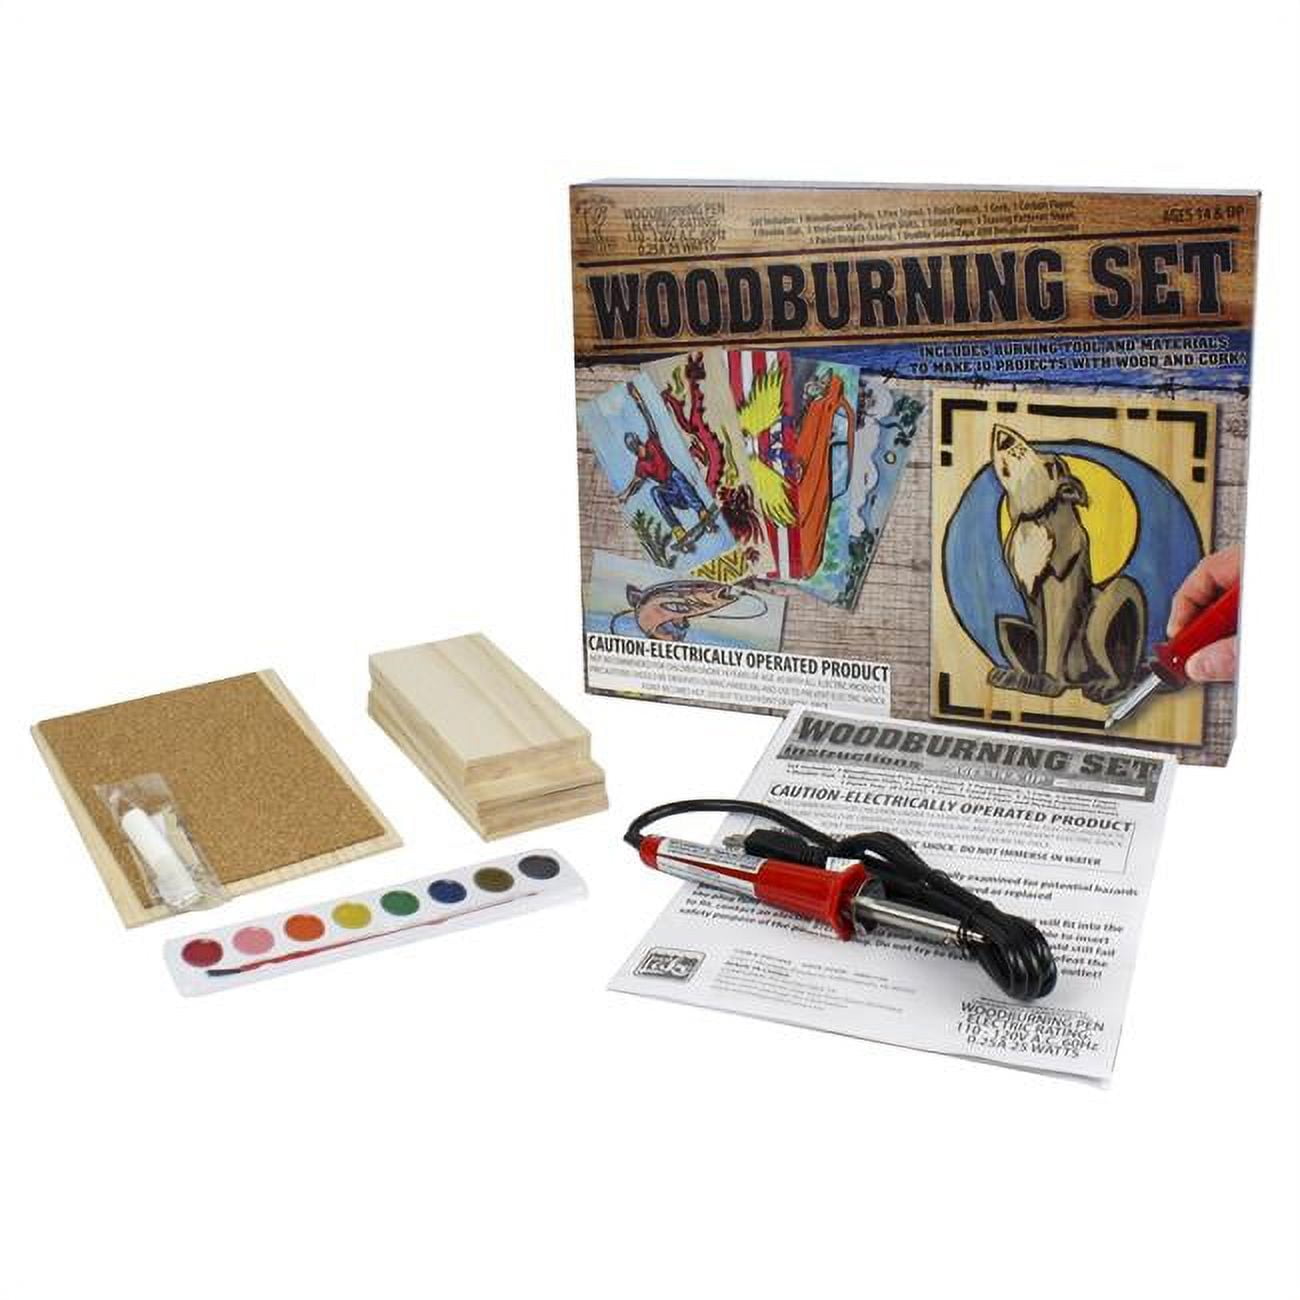 Gener8 Wood Burning Kit Recommended Teens Ages 14 Years and up.